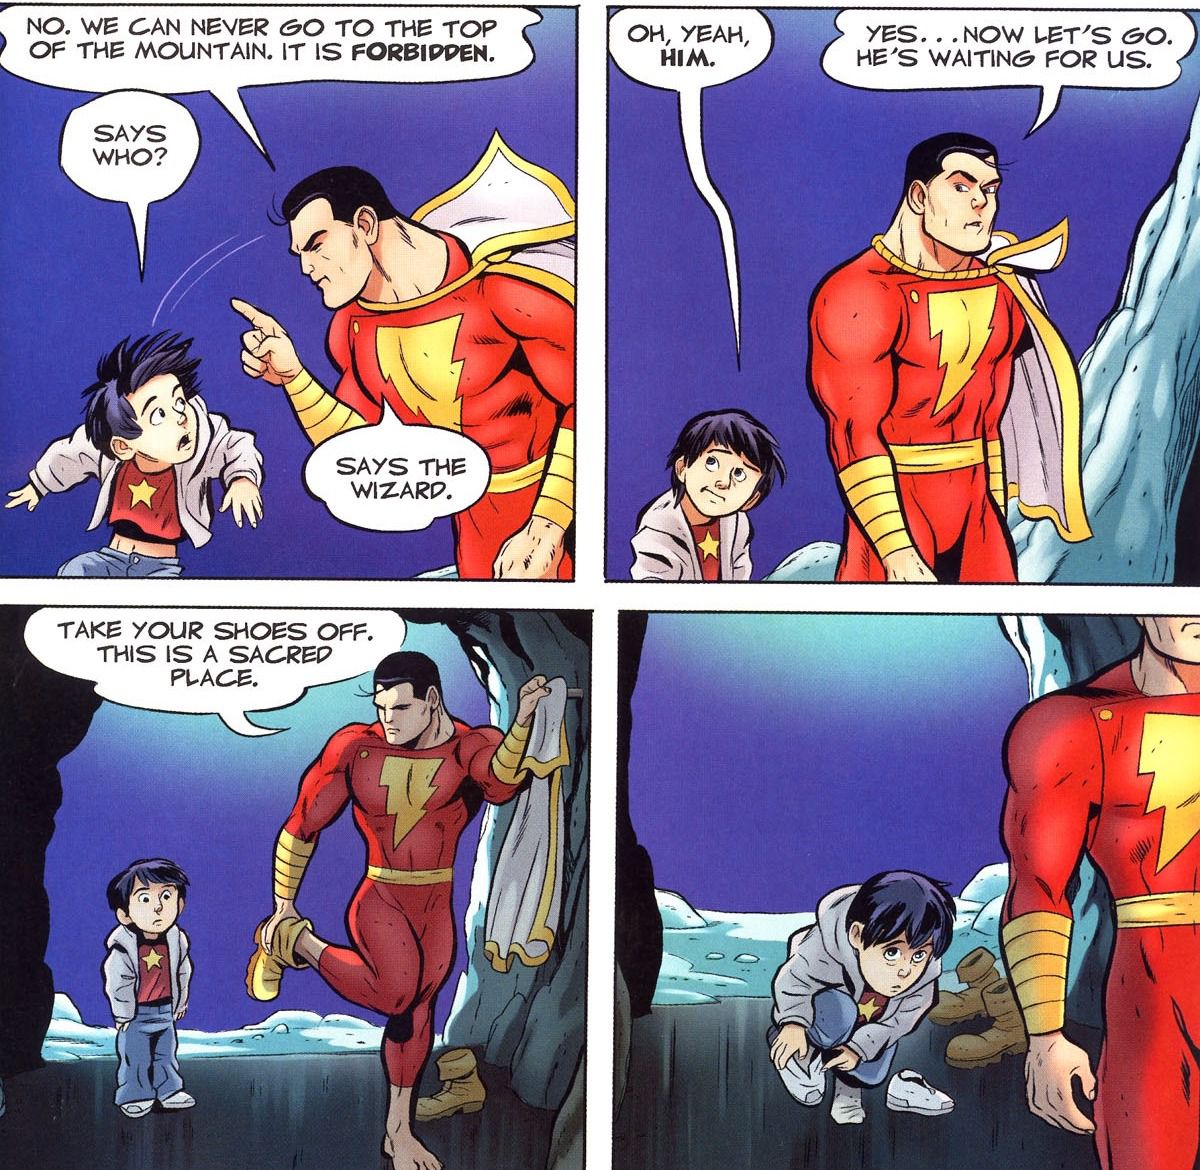 Captain Marvel (DC Comics) and Billy Batson arrive at the Rock of Eternity. “Tack your shoes off,” Marvel tells Billy, “This is a sacred place.” in Shazam!: The Monster Society of Evil.